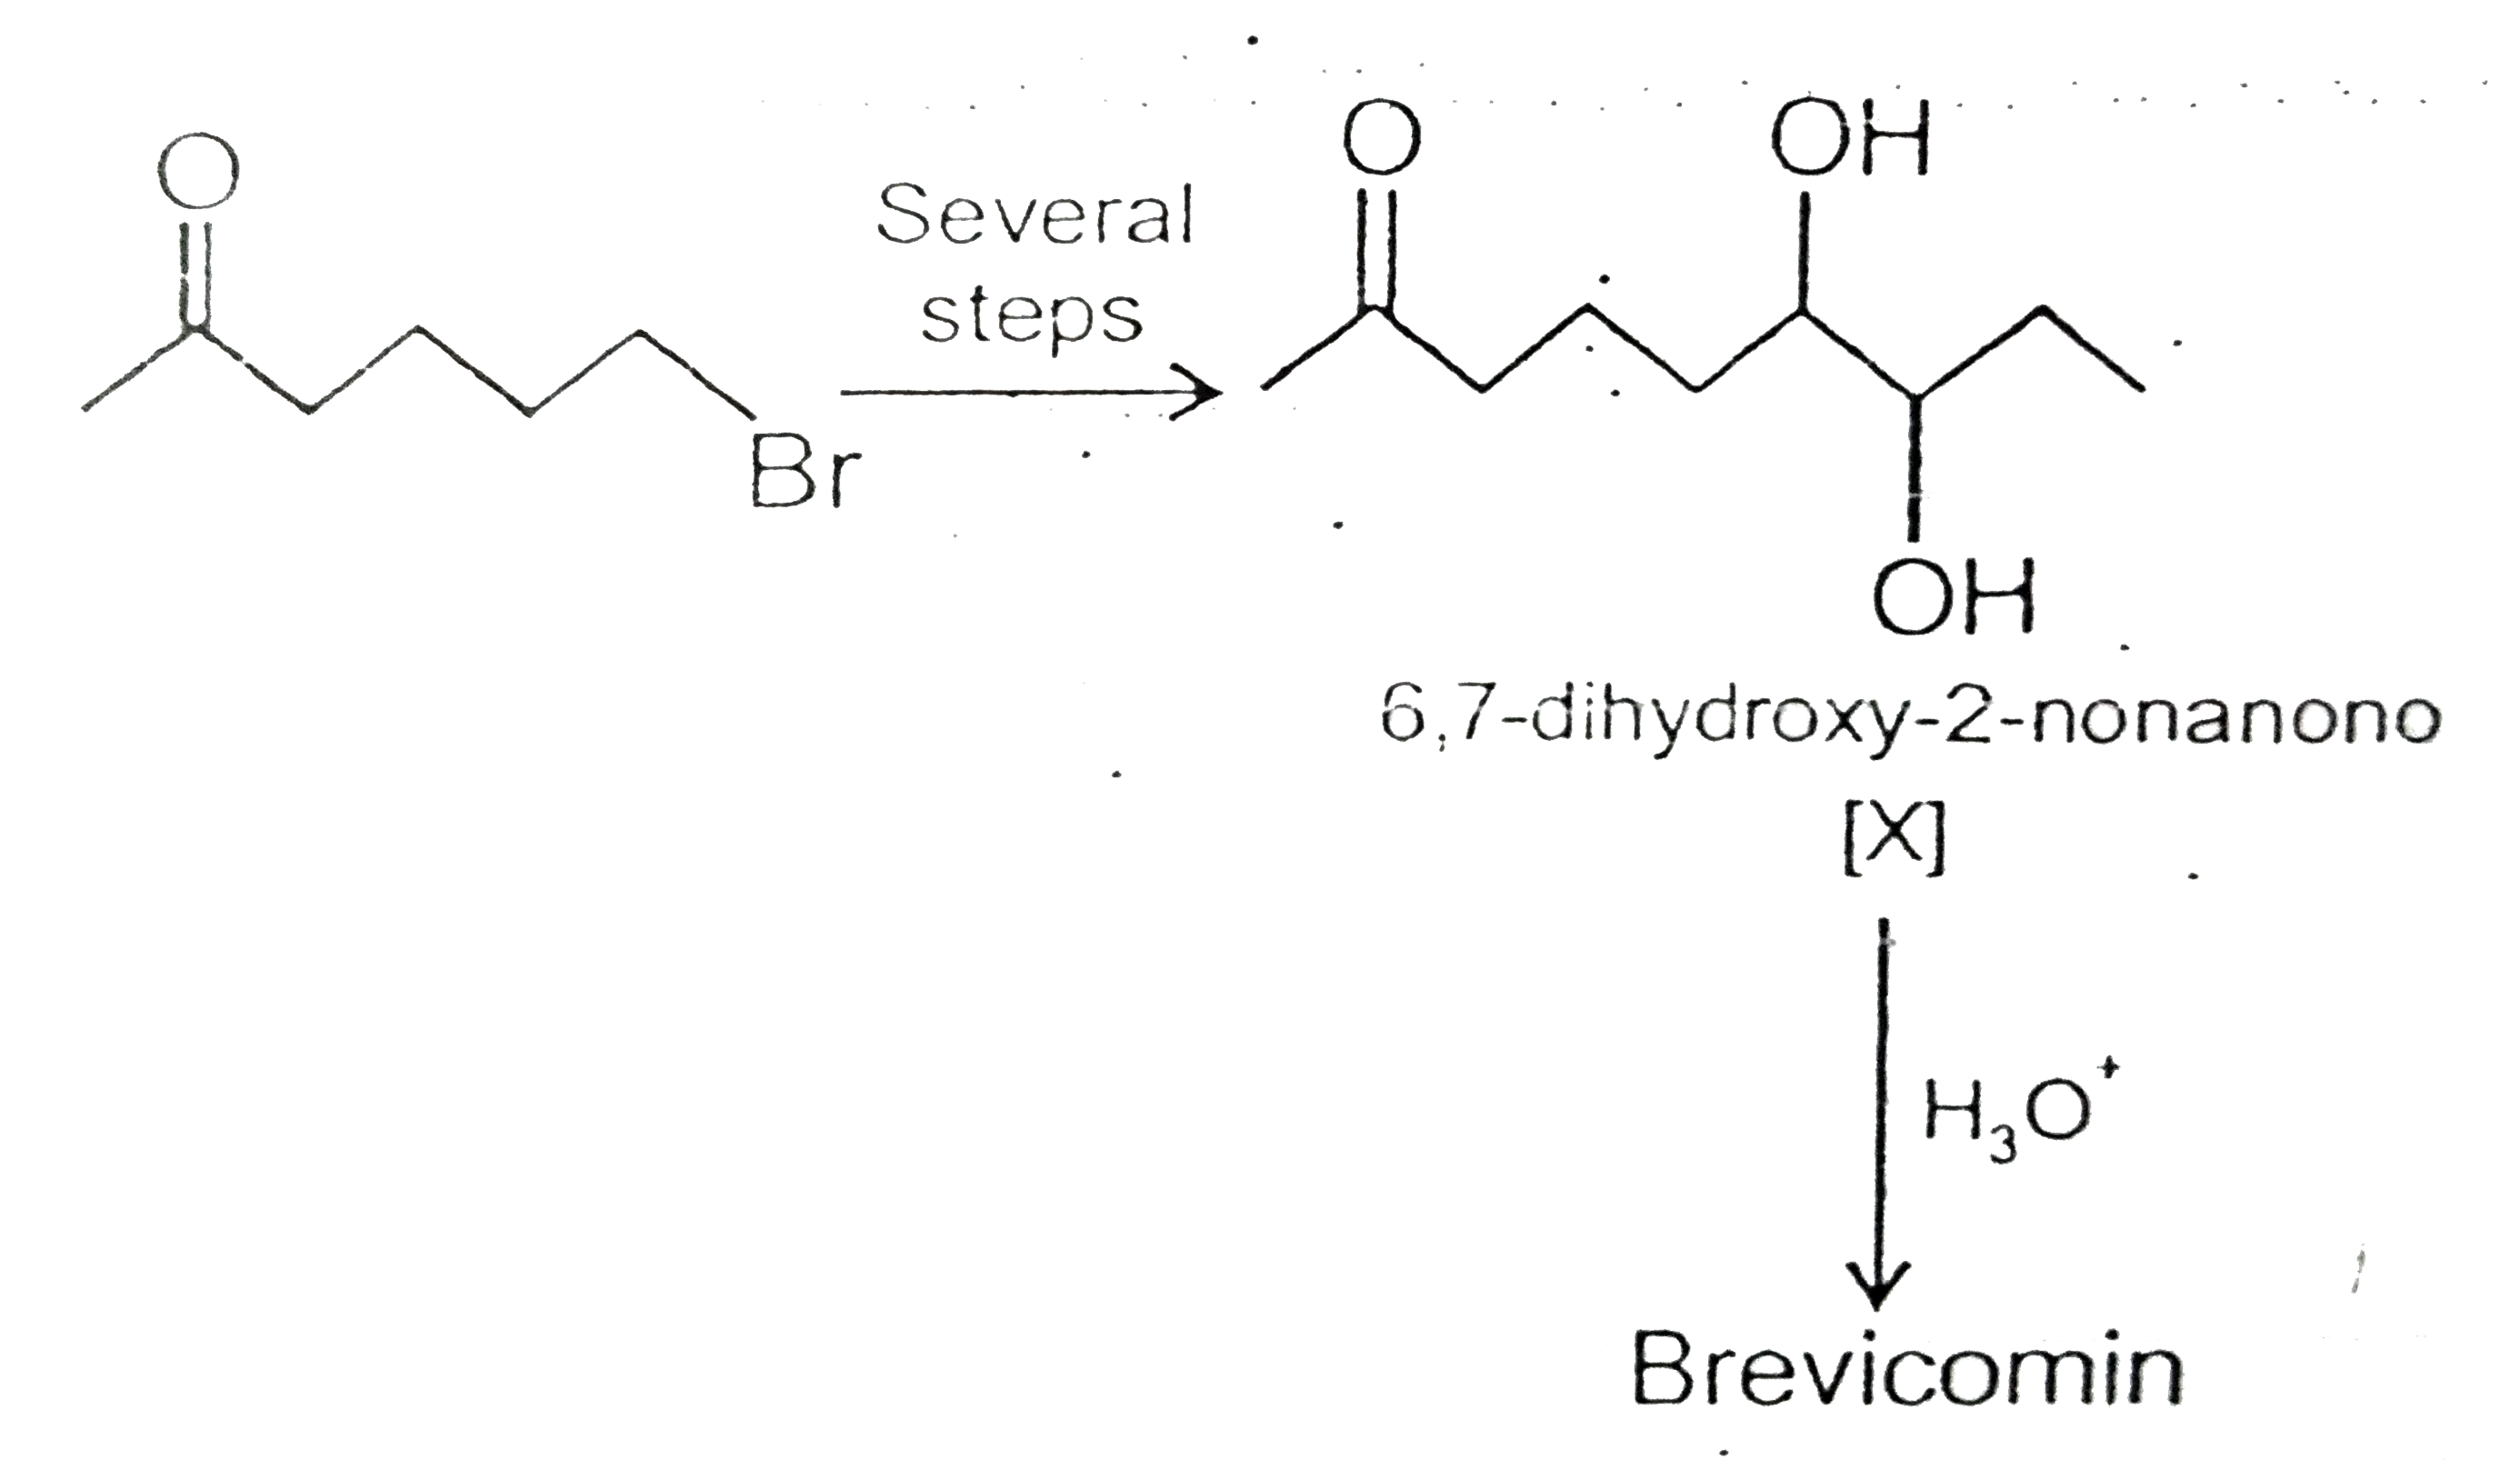 Brvicomin, the aggregation pheromone of the western pine bark beetle, contains a bicylic bridged ring system. Brevicomin is prepared by the acid catalyzed cyclization of 6,7-dihydroxy-2-nonanone.   (i) Suggest a structure for brevicomin.   (ii) Devise a synthesis of 6,7-dihydroxy-2-nonamone from 6-bromo-2-hexanone. You may also use three carbon alcohols and any required organic or inorganic reagents.